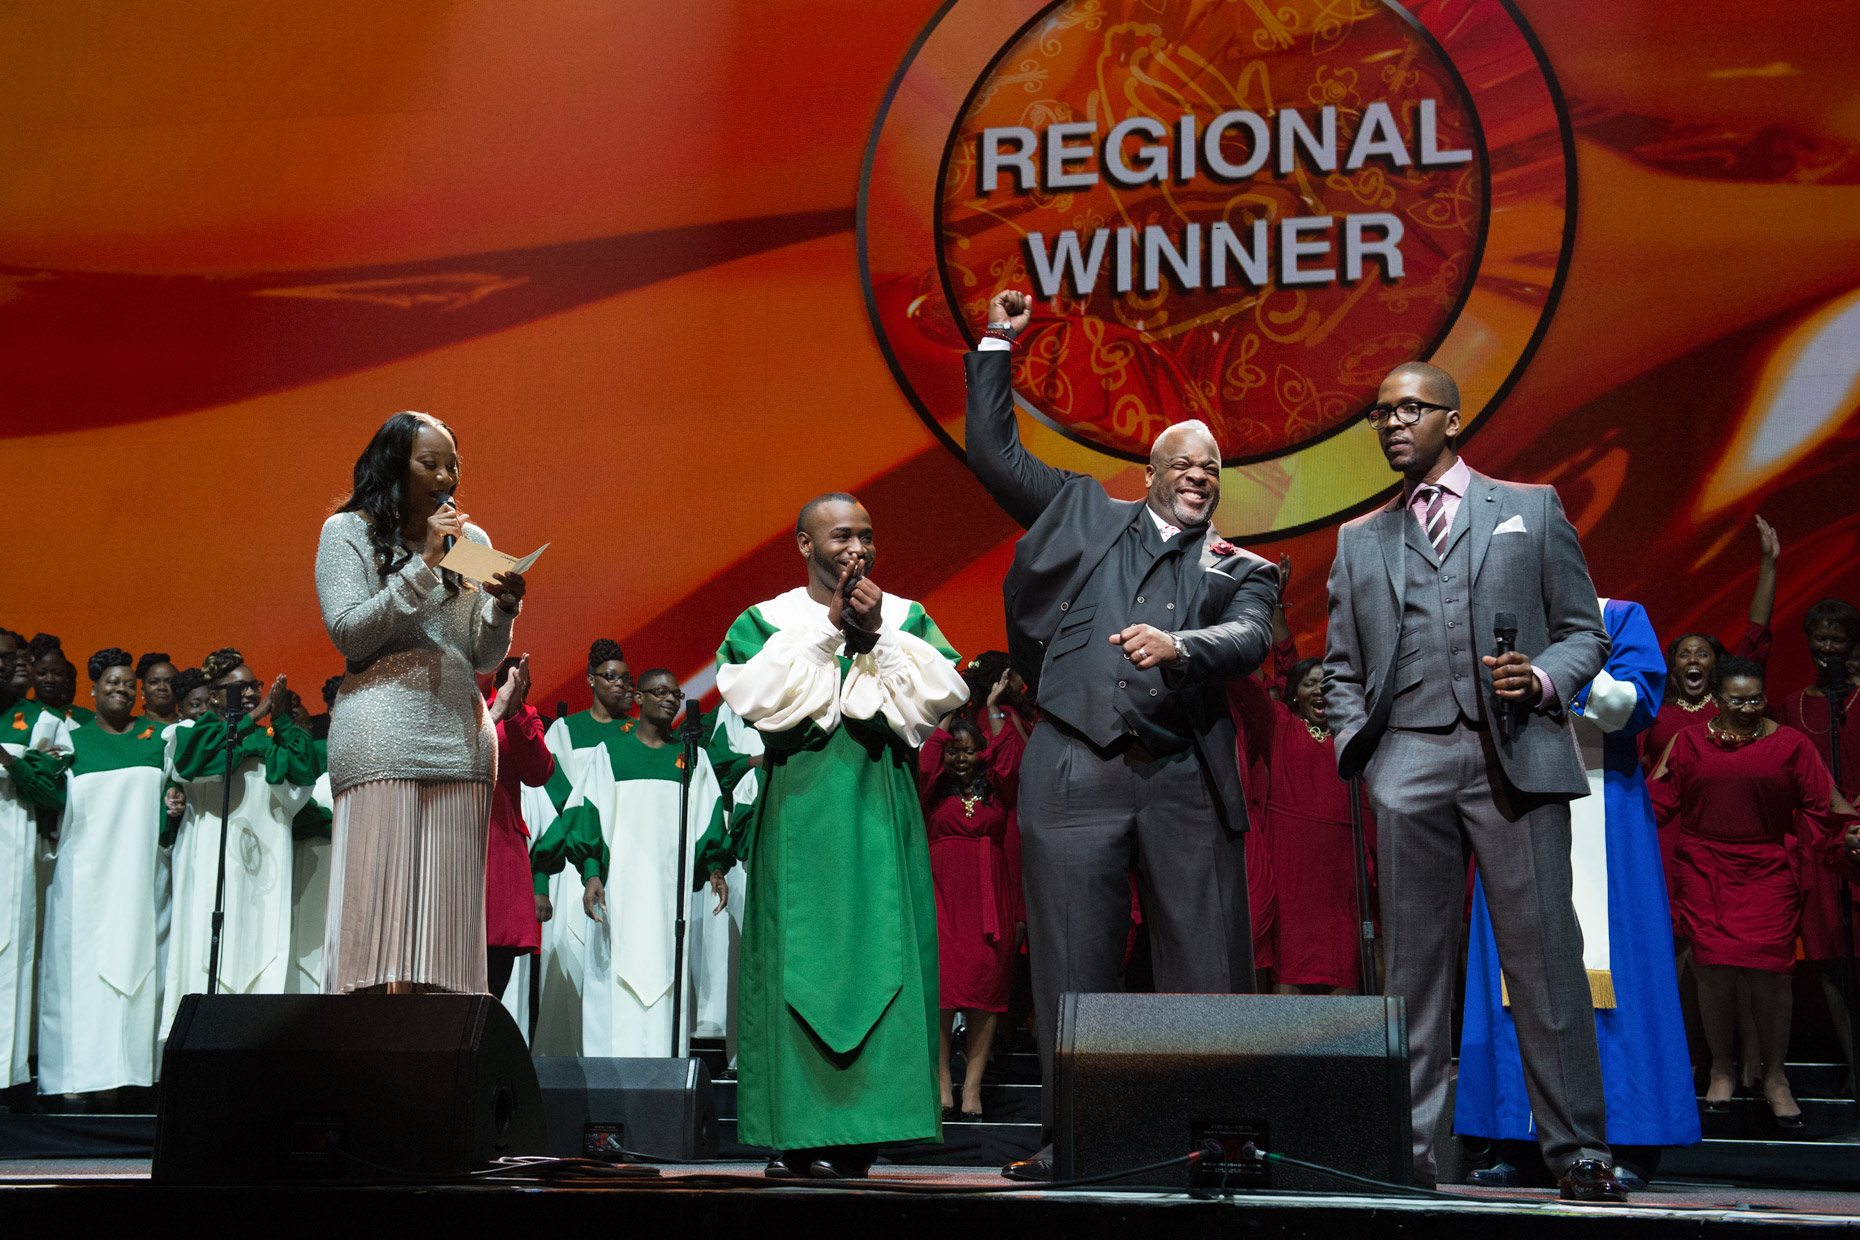 Gospel Choir Competition by Dallas editorial photographer Kevin Brown